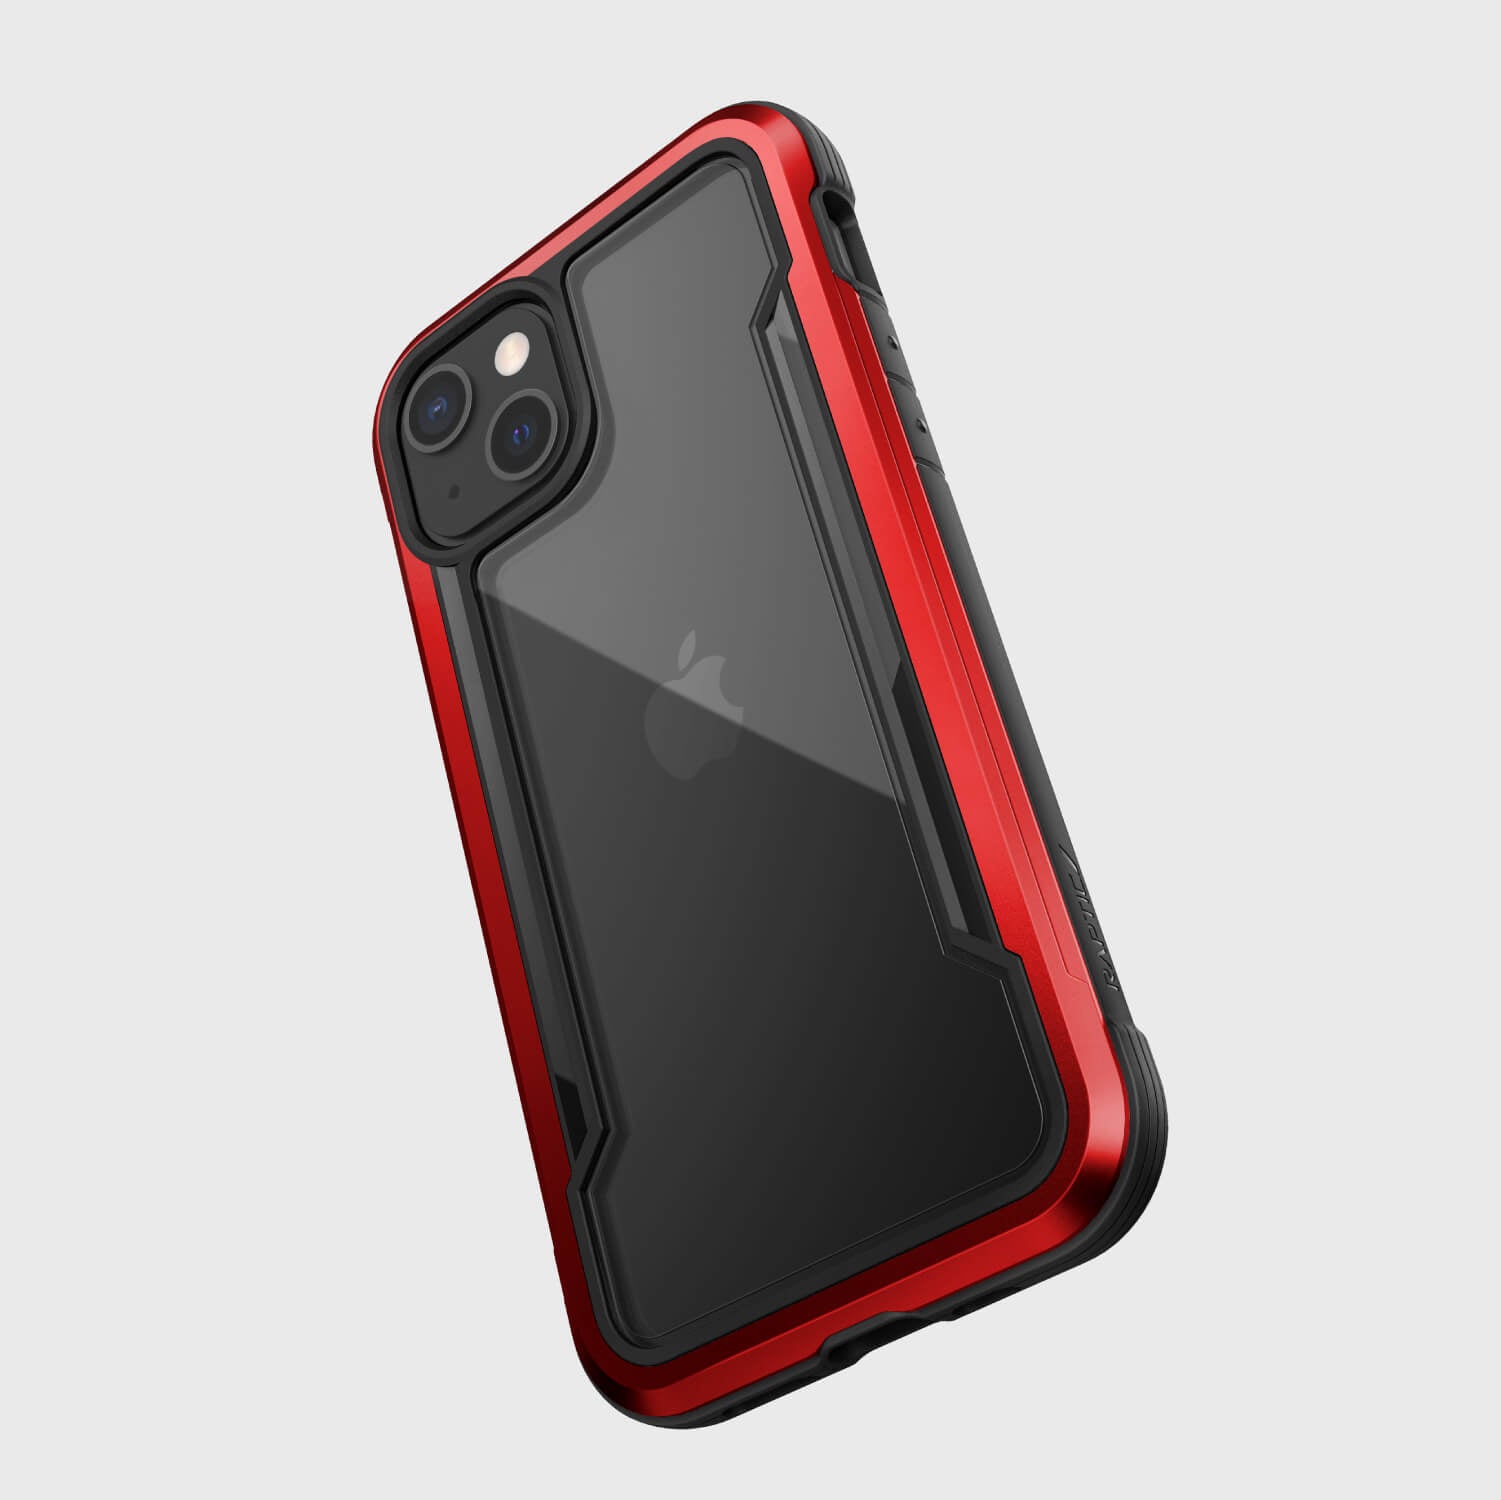 The Raptic iPhone 13 Case - SHIELD PRO offers drop protection in an eye-catching red and black design.